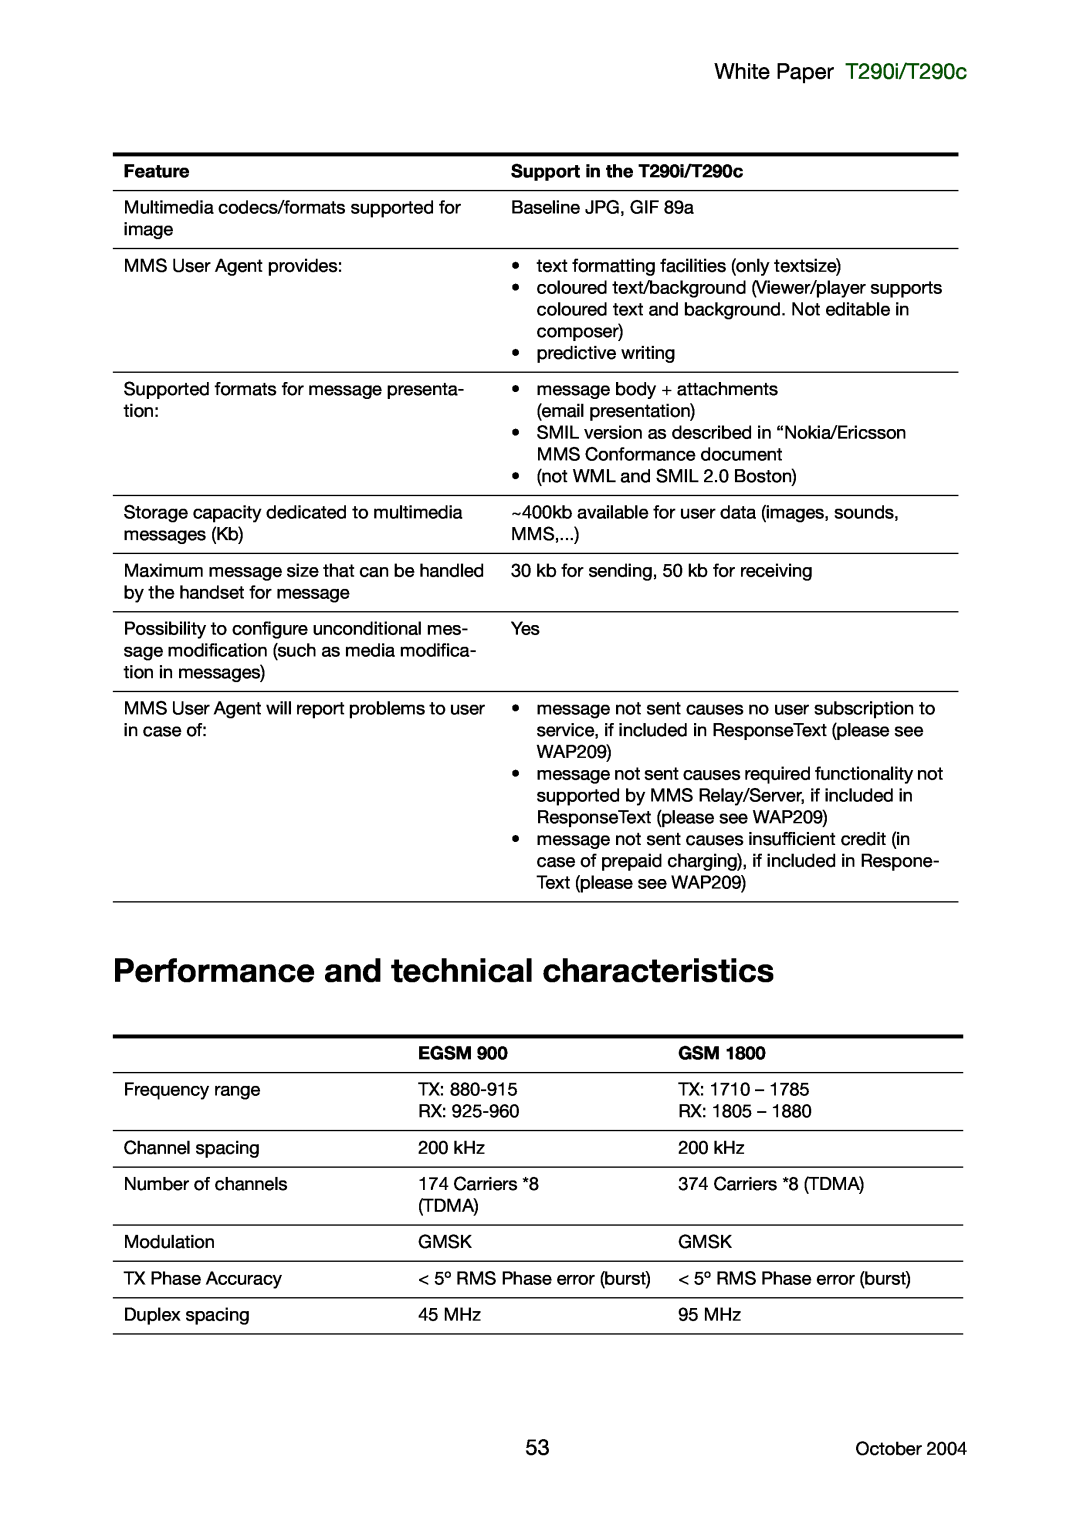 Sony Ericsson manual Performance and technical characteristics, White Paper T290i/T290c 